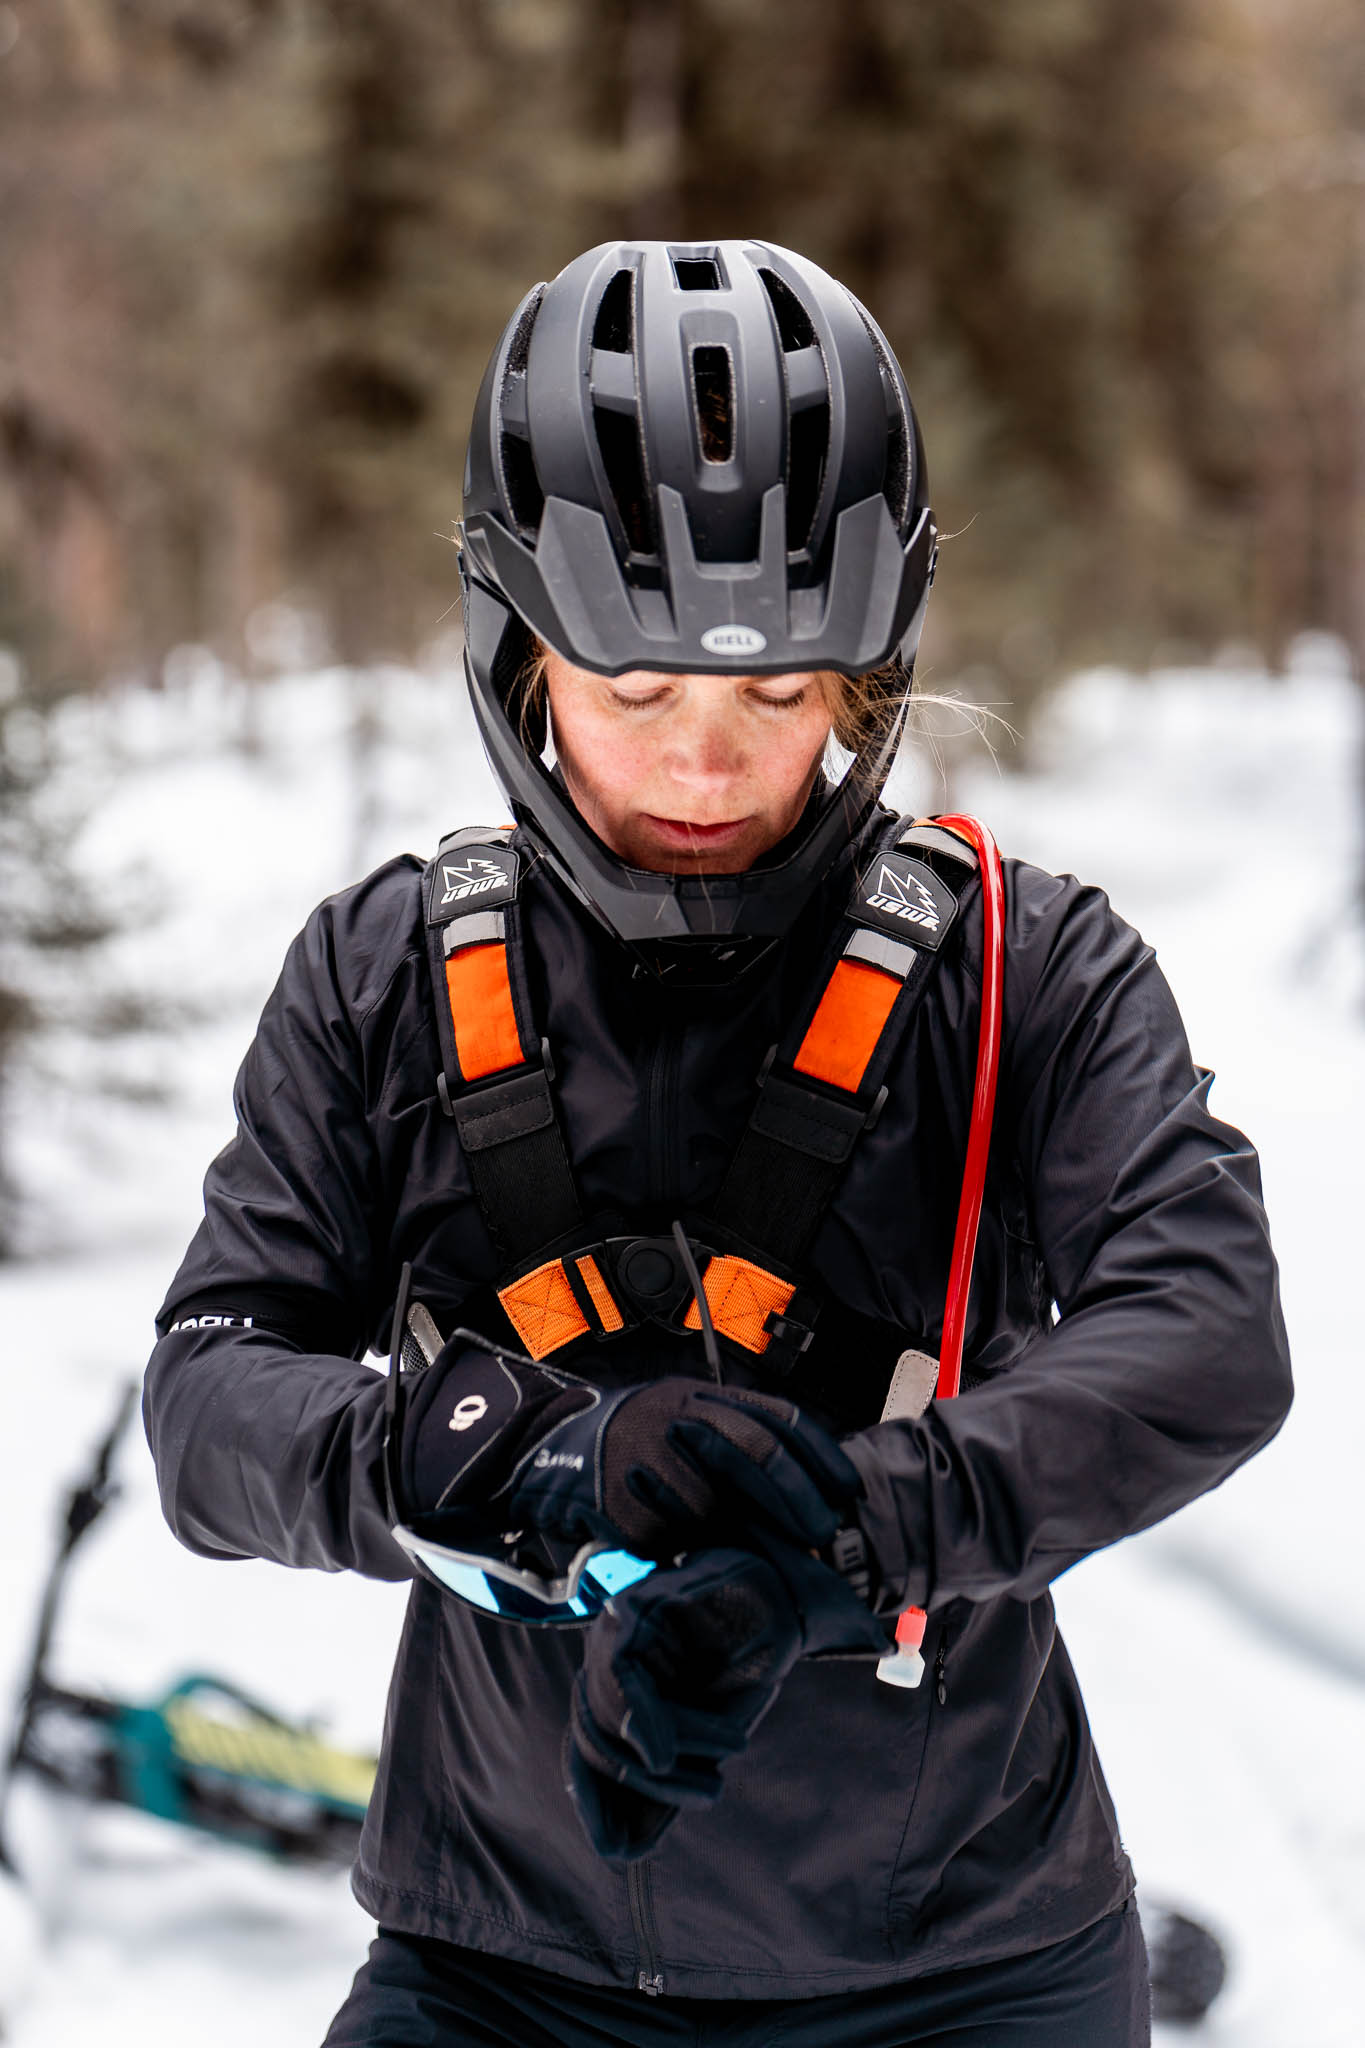 Malin looking at her watch with the fatbike in the background